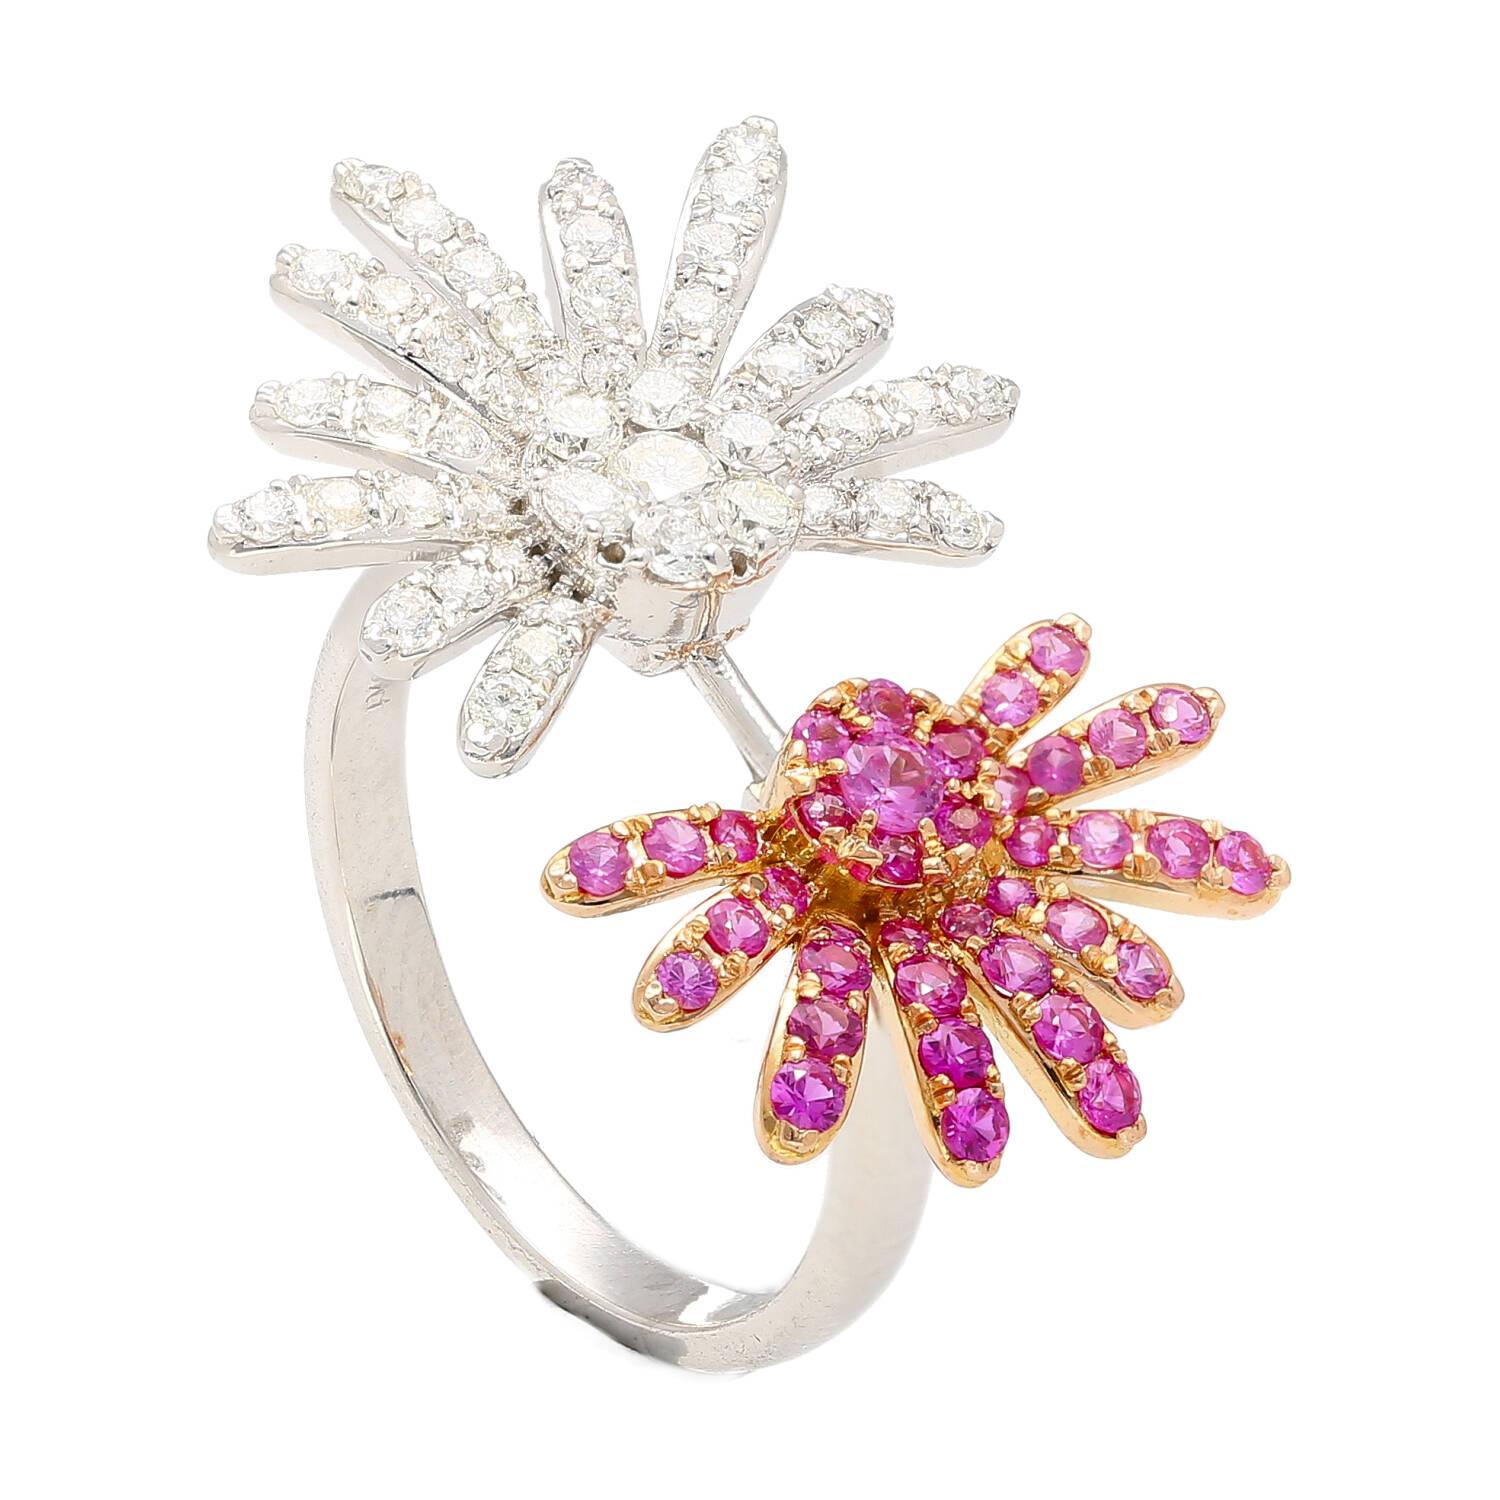 1.25 Carat Diamond & Pink Sapphire Floral Open Toi Et Moi 18K Ring In New Condition For Sale In Miami, FL